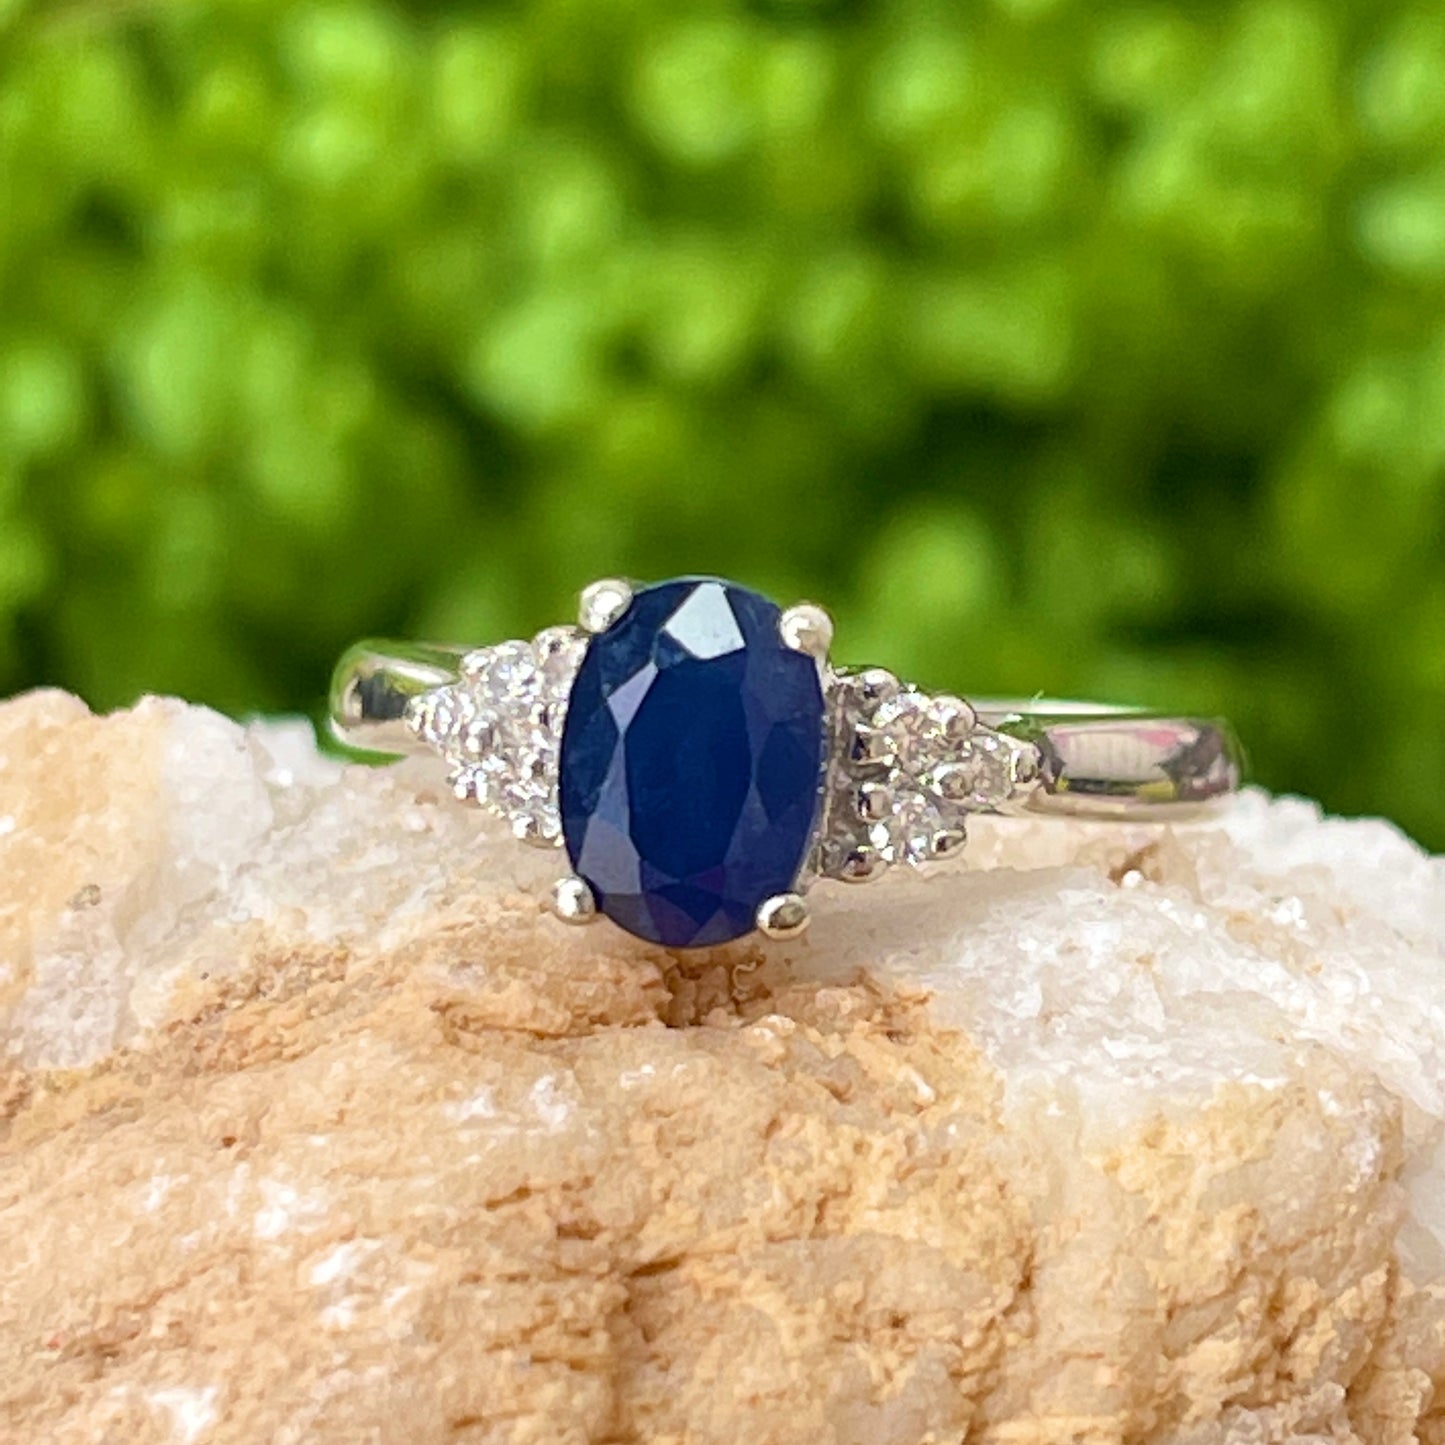 Estate 14KT White Gold Oval 1.00 CT Blue Sapphire + Diamond Accent Ring